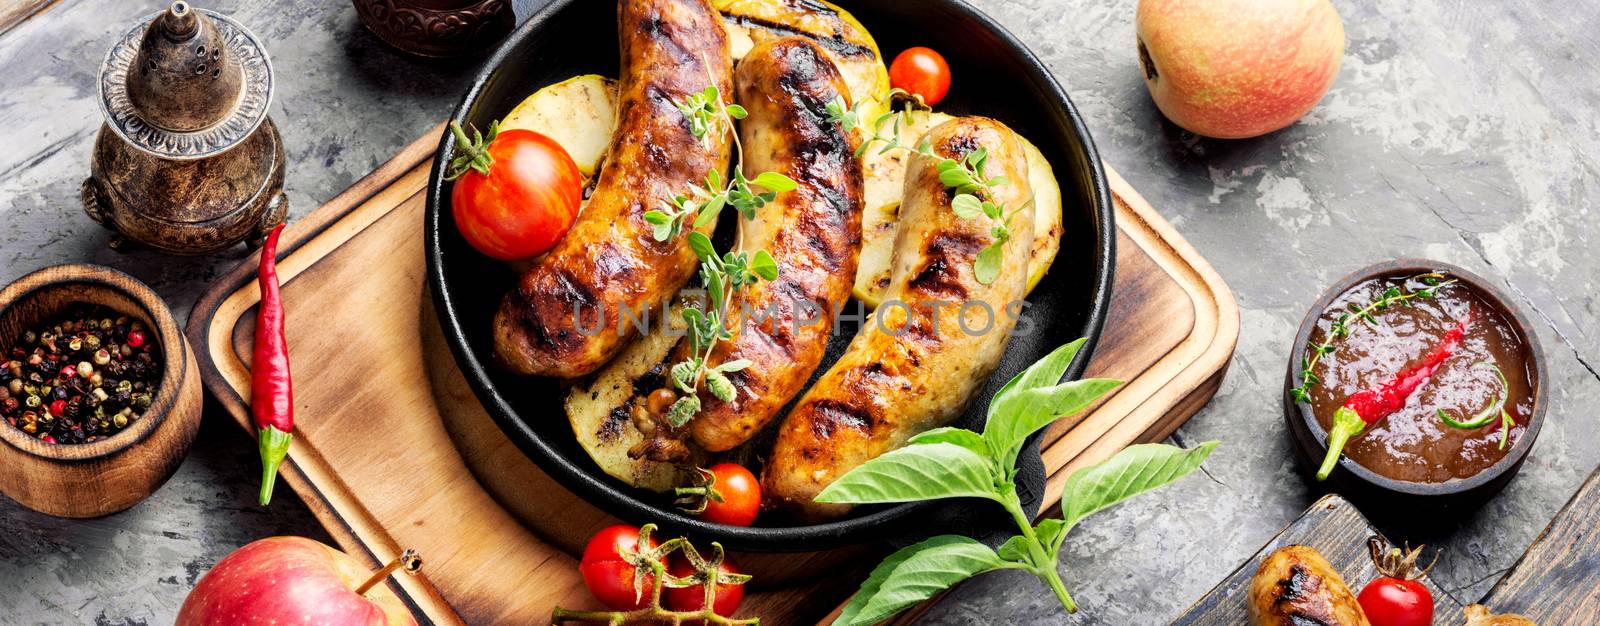 Delicious sausages grilled with spicy spices and apples.BBQ with sausages